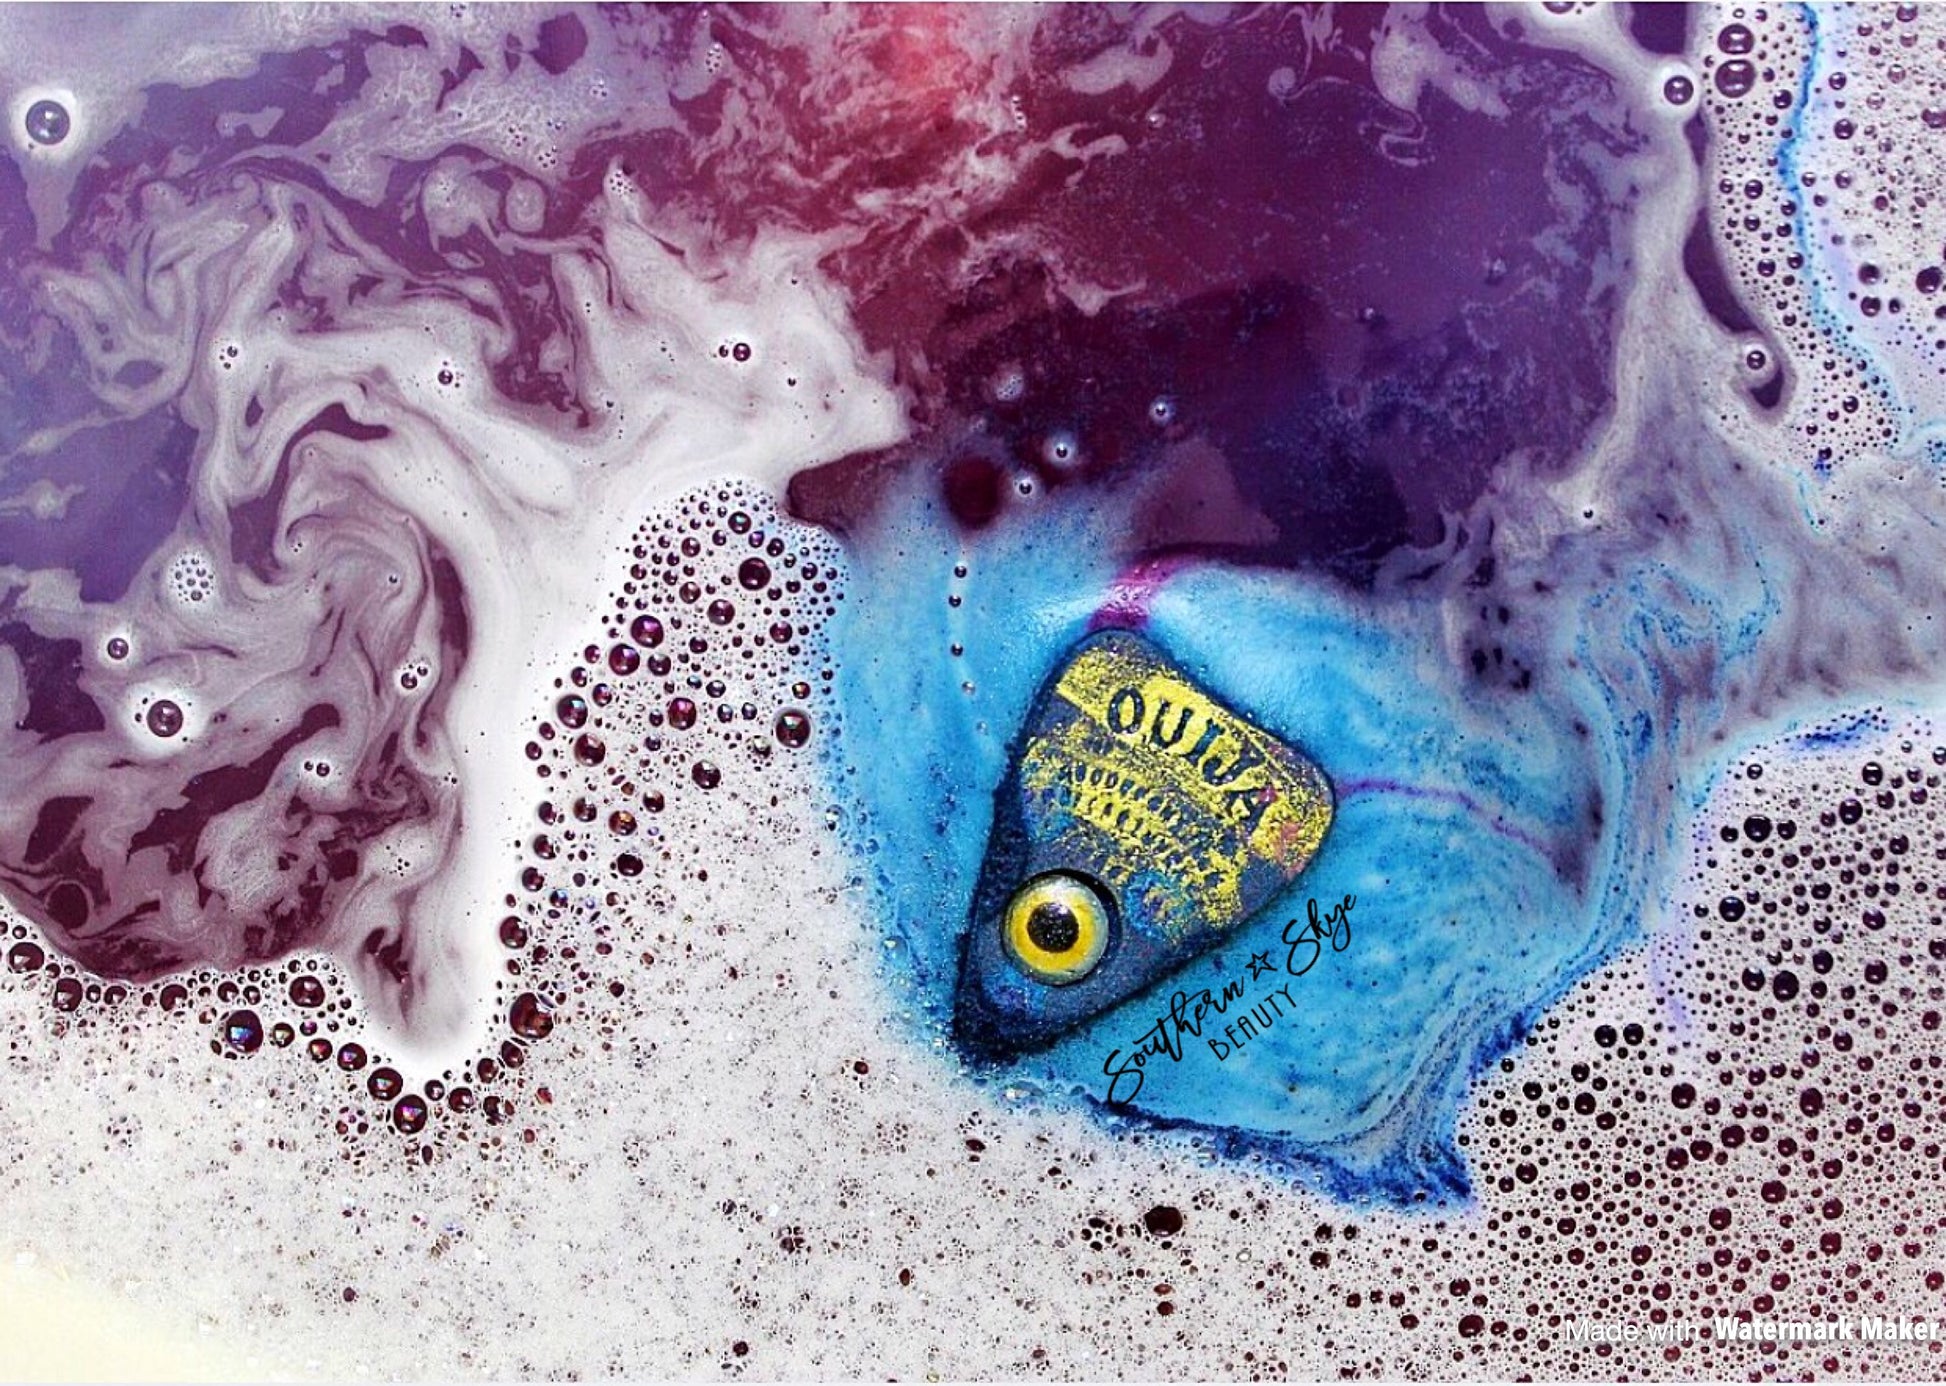 Southern Skye Beauty The Further Bath Bomb - planchette shaped bath bomb with a hand made soap eyeball dissolving in water